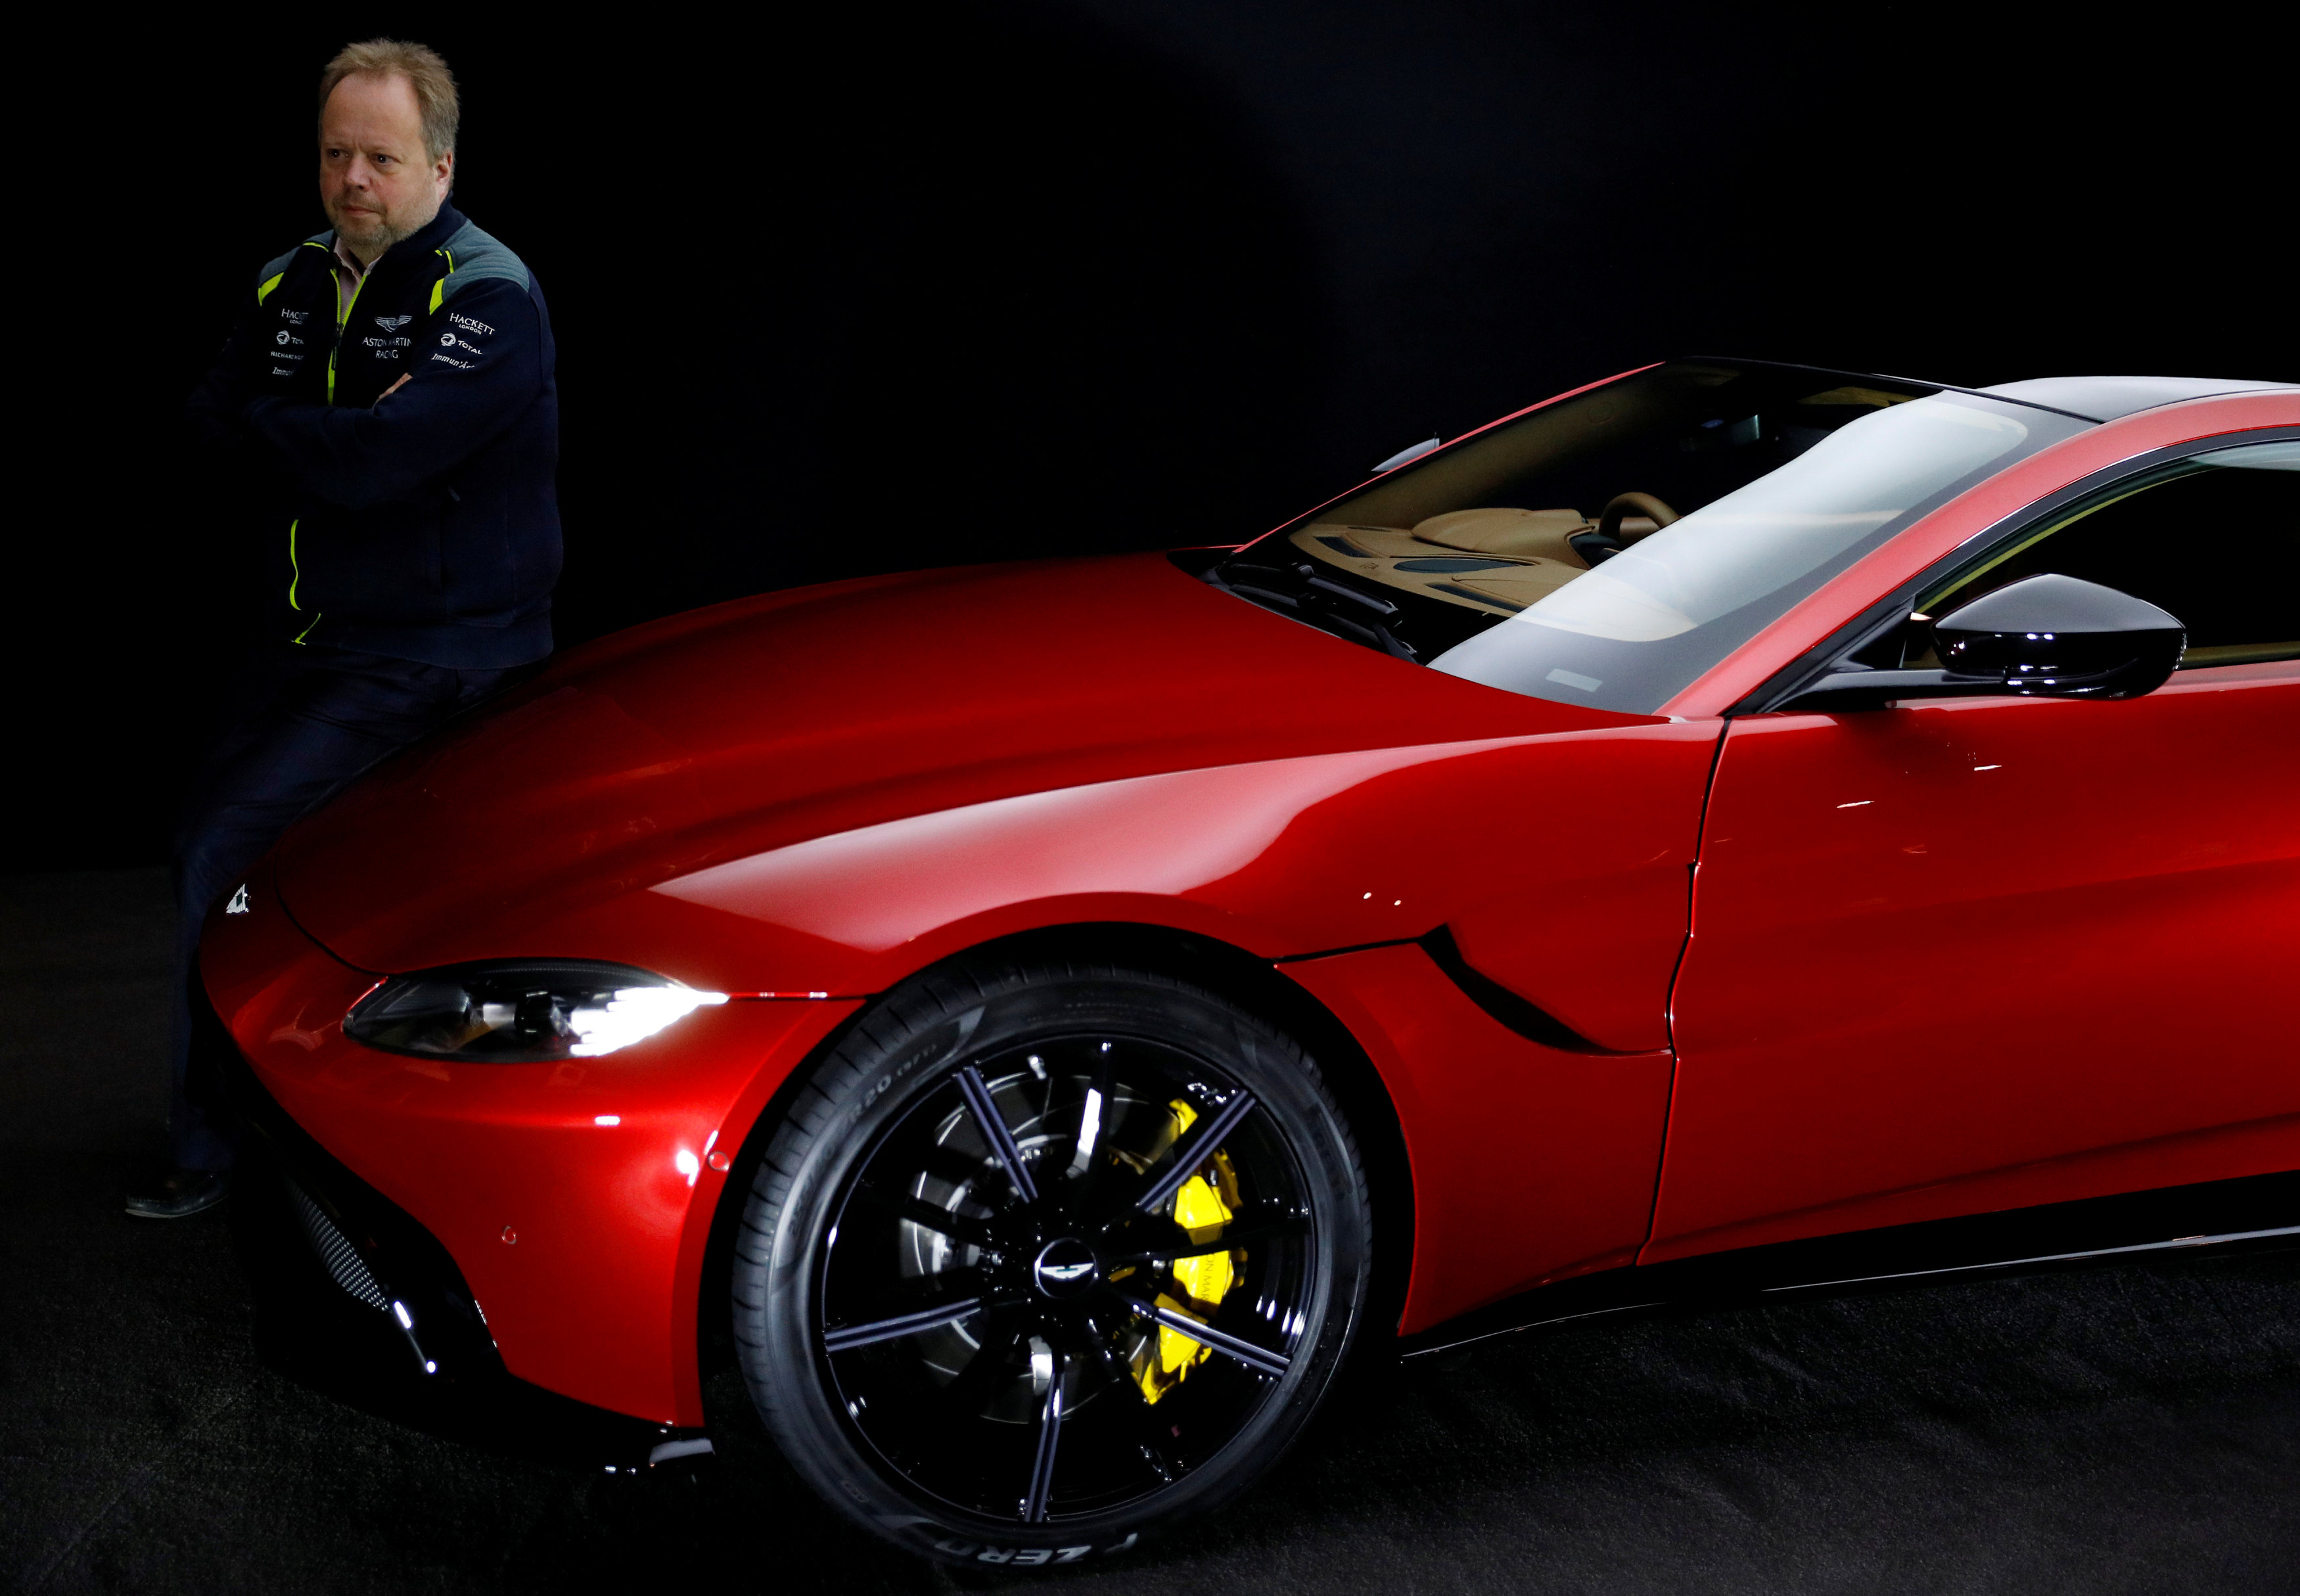 Aston Martin aims to steer round Brexit to $6.7bn IPO